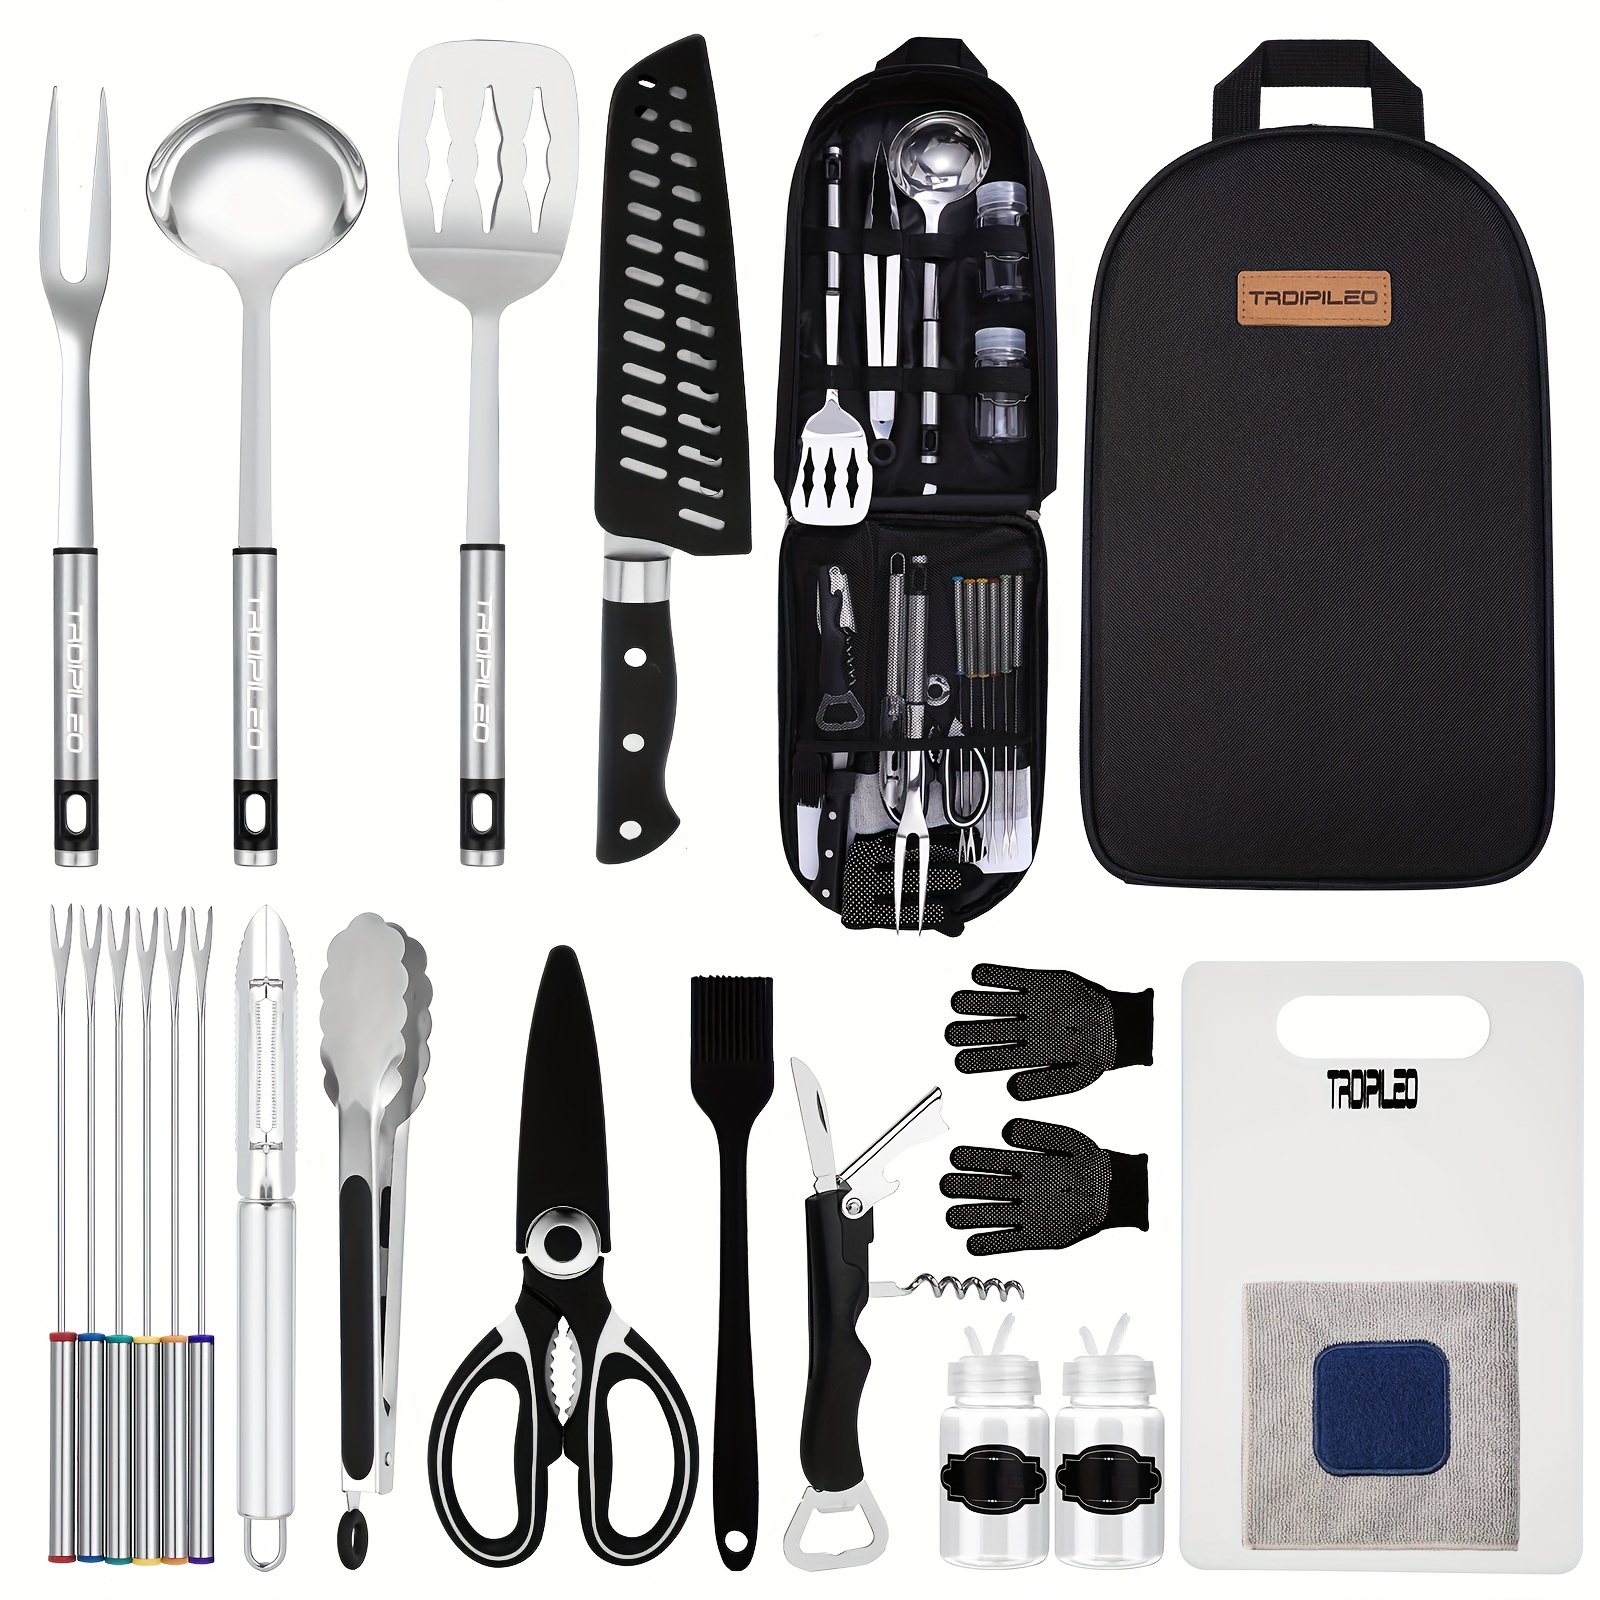 

Grilling And Camping Cooking Utensils Set For The Outdoors Bbq Camping Utensil Set Camping Kitchen Set Cookware Accessories Camping Essentials Camp Cooking Set